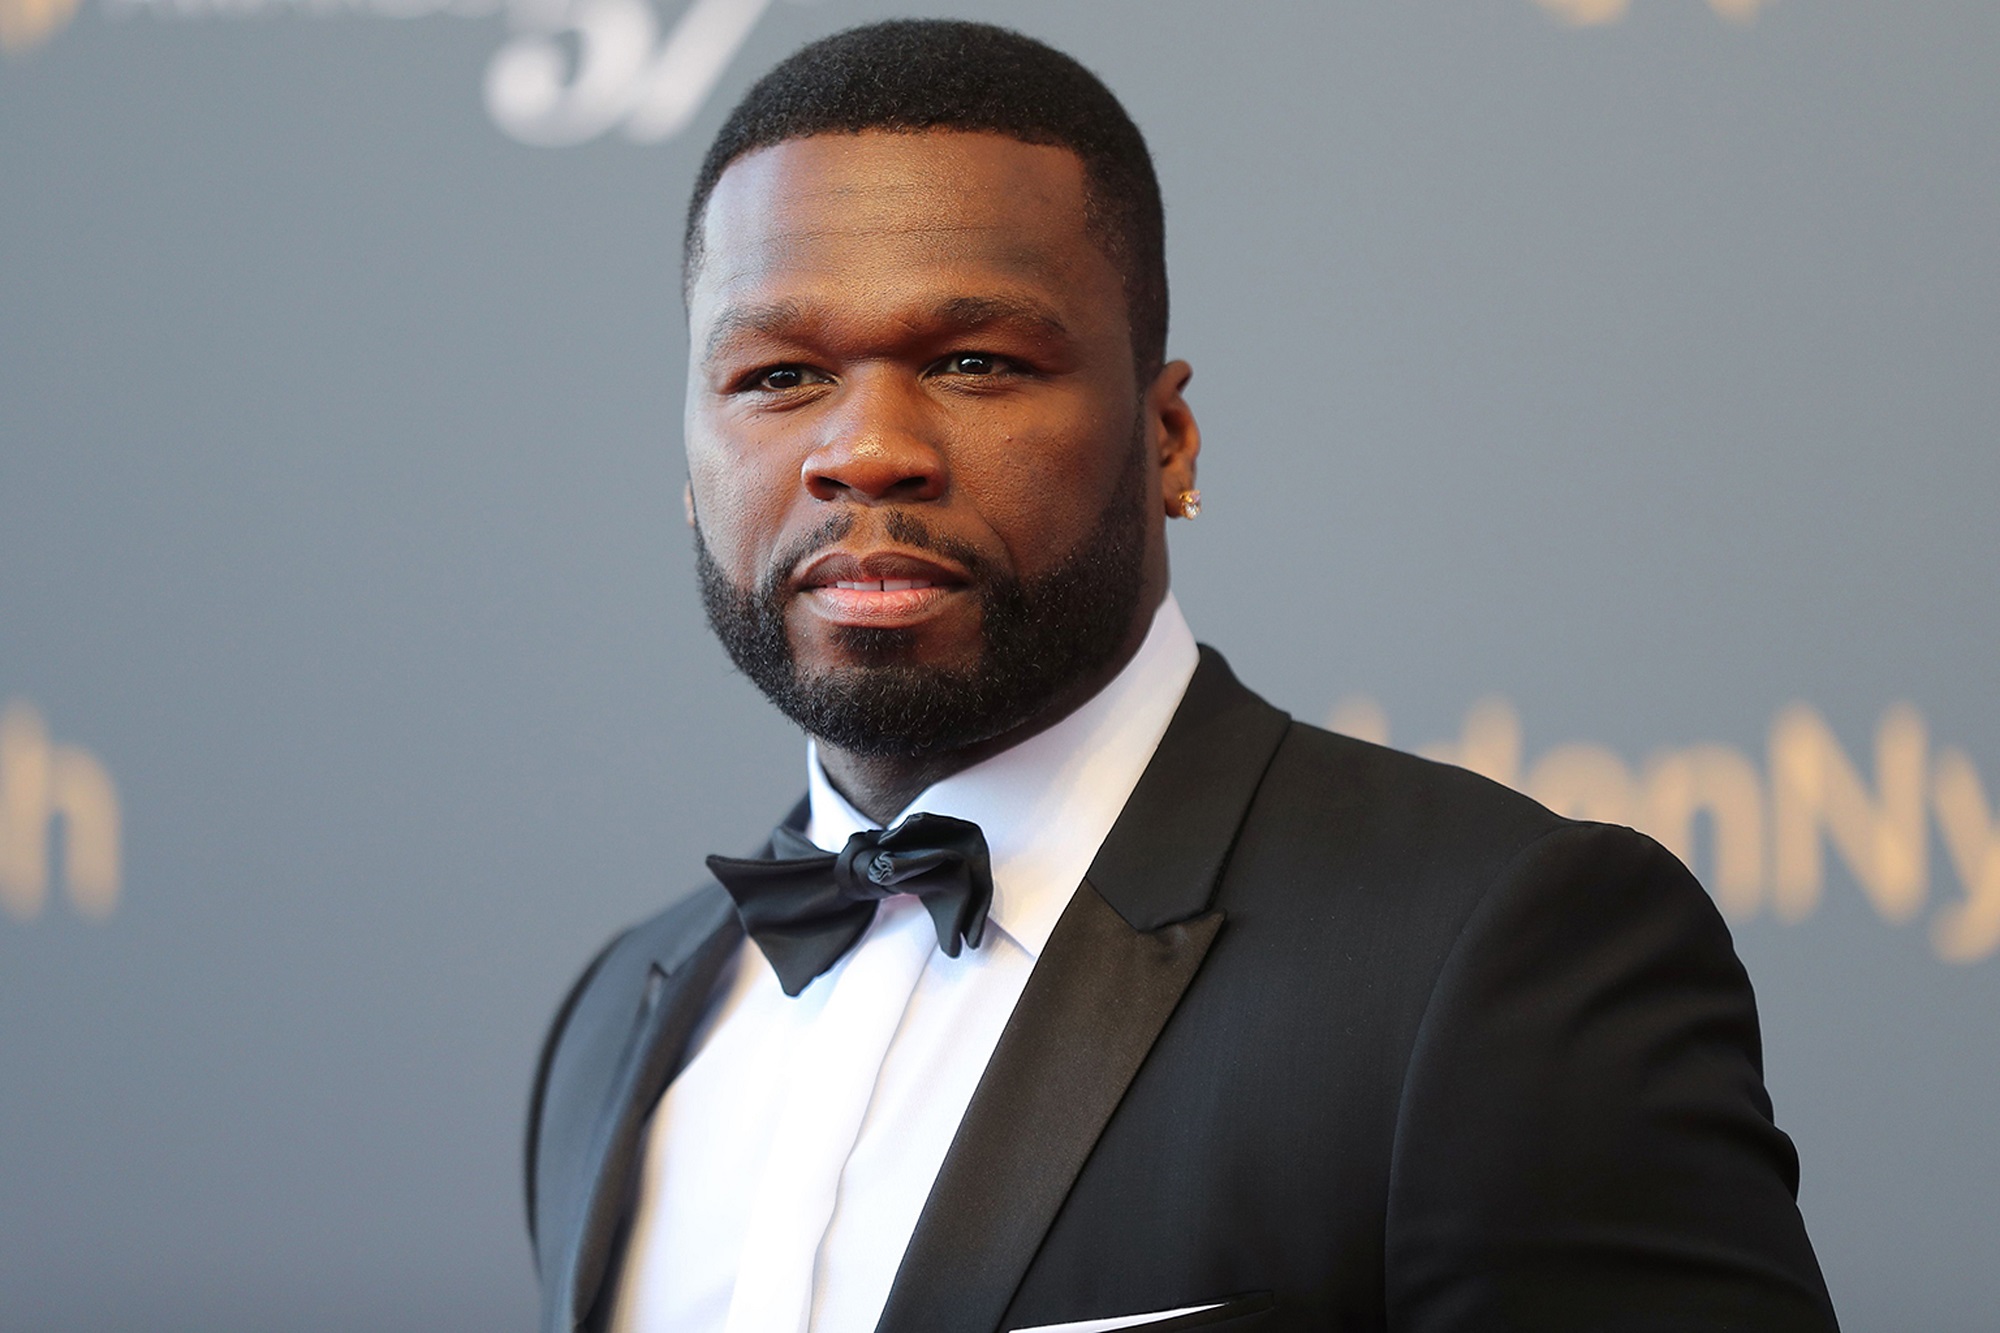 50 Cent Responds to 21 Savage Dissing Jeezy on "Many Men"